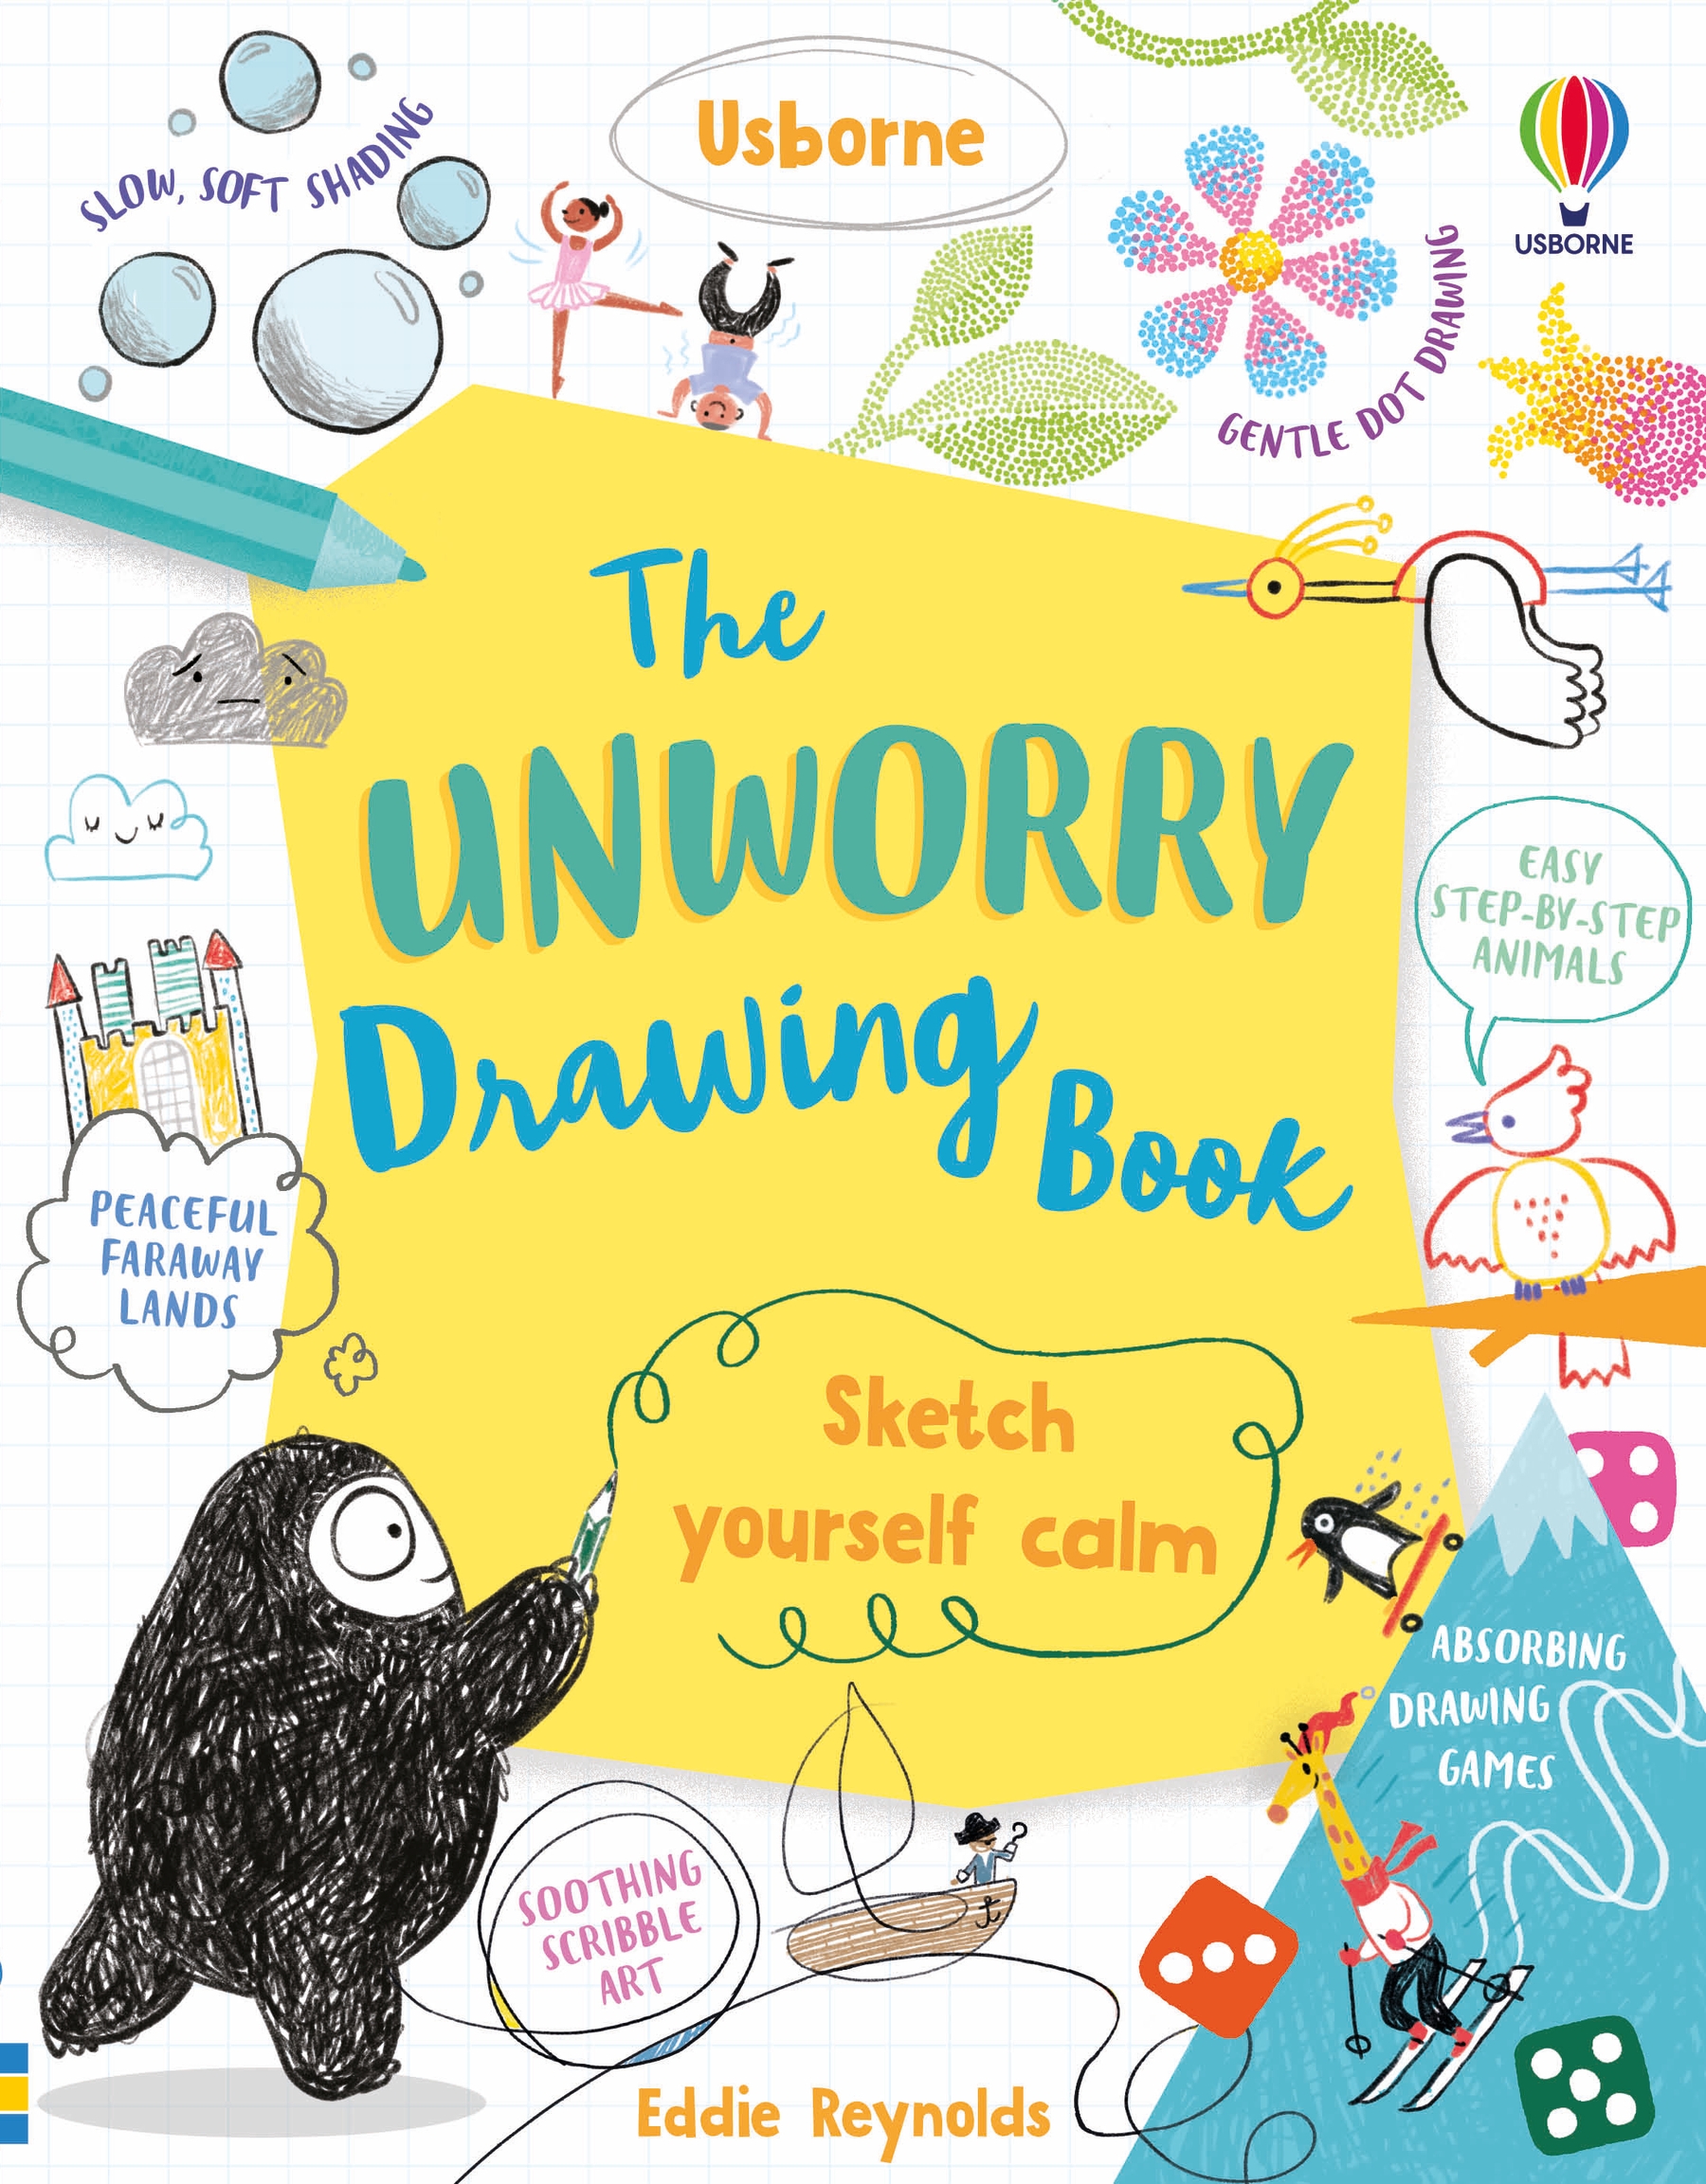 Book　Usborne　Unworry　Curious　Drawing　Be